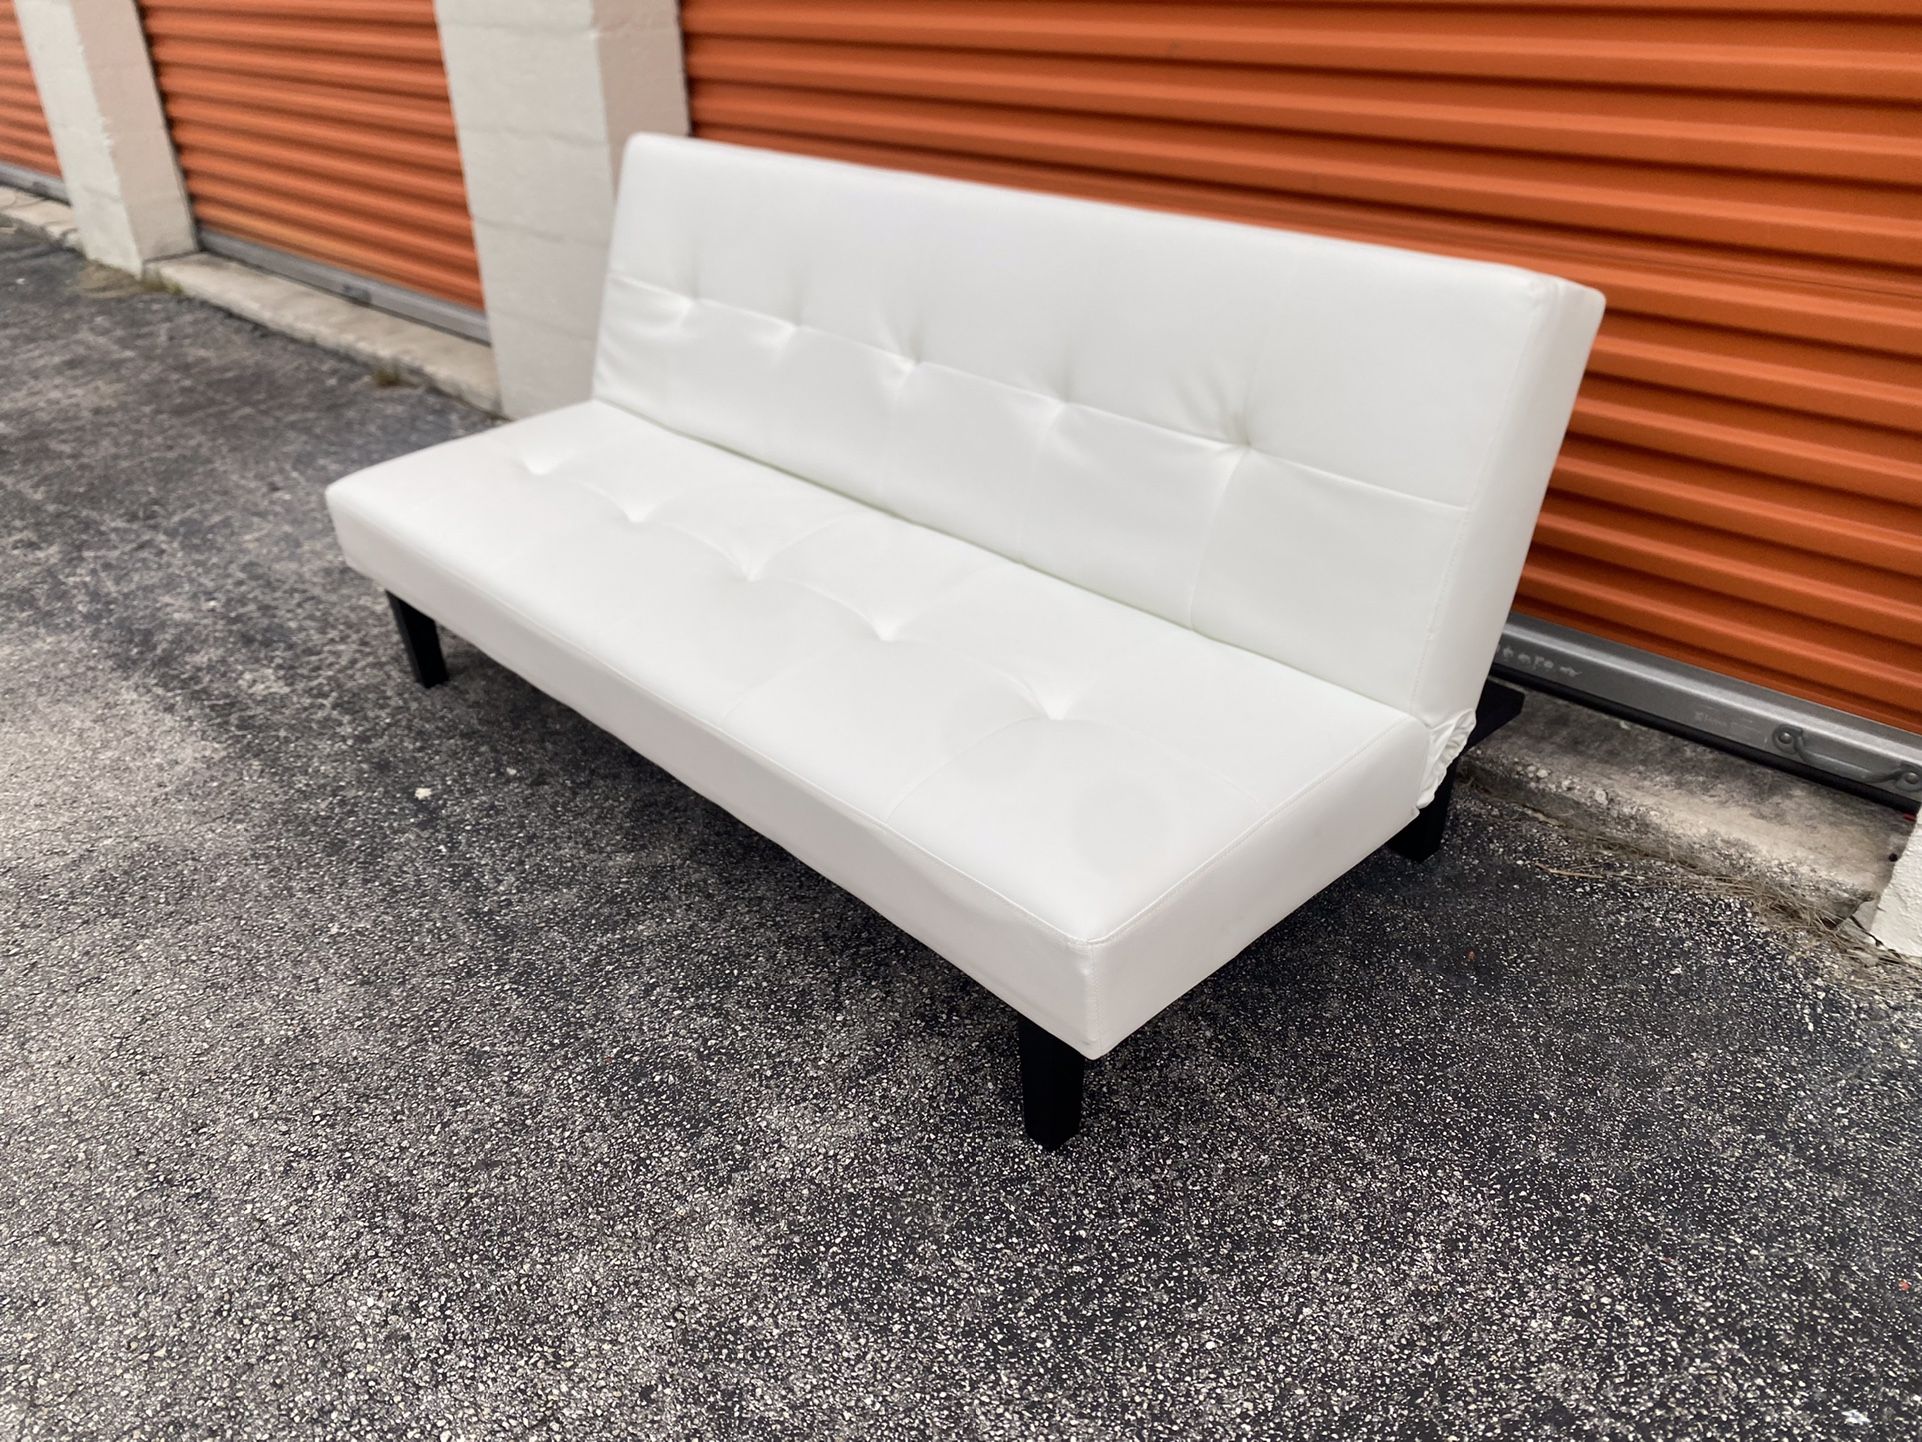 White Leather Couch Futon Bed